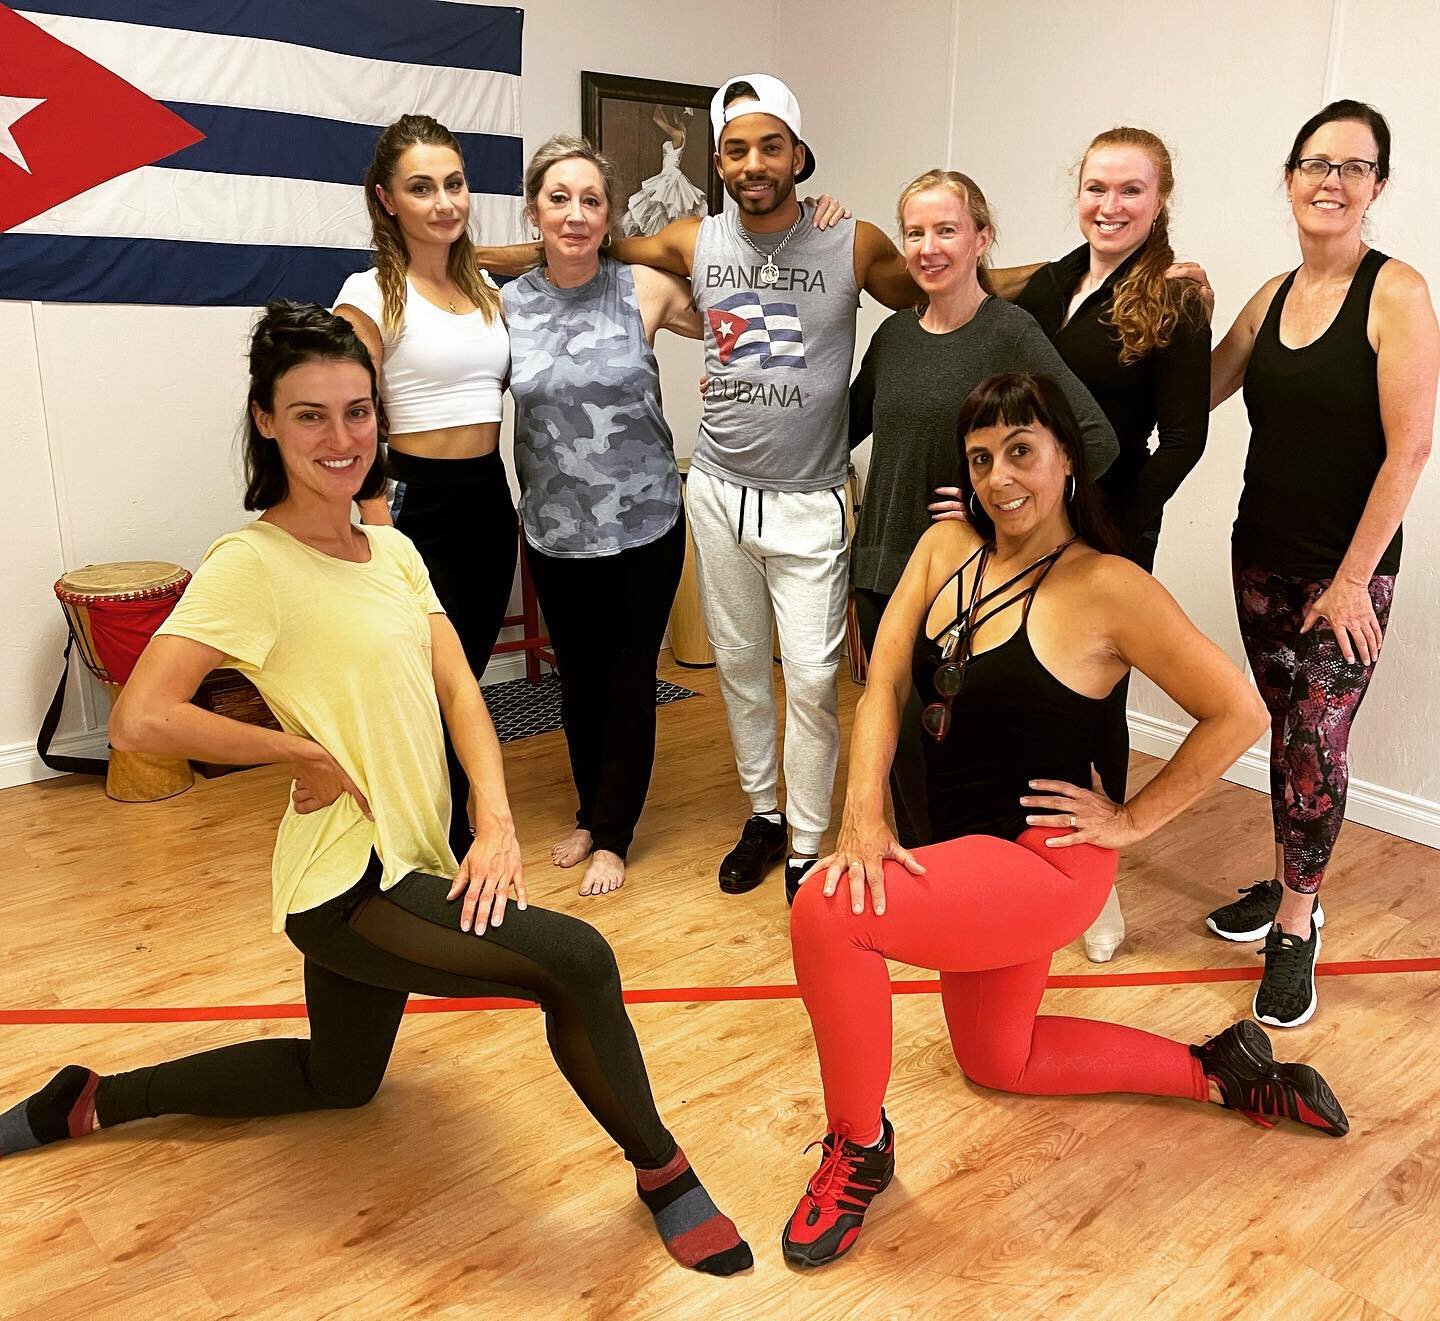 Great rumba class to end our AfroCuban Dance classes for the Summer session!!!

You can still catch our Director @leoglezdancer once more this Thursday for Mambo (6:15 to 7:15) followed by Salsa Suelta (7:30 to 8:30).

Studio will be closed from Frid